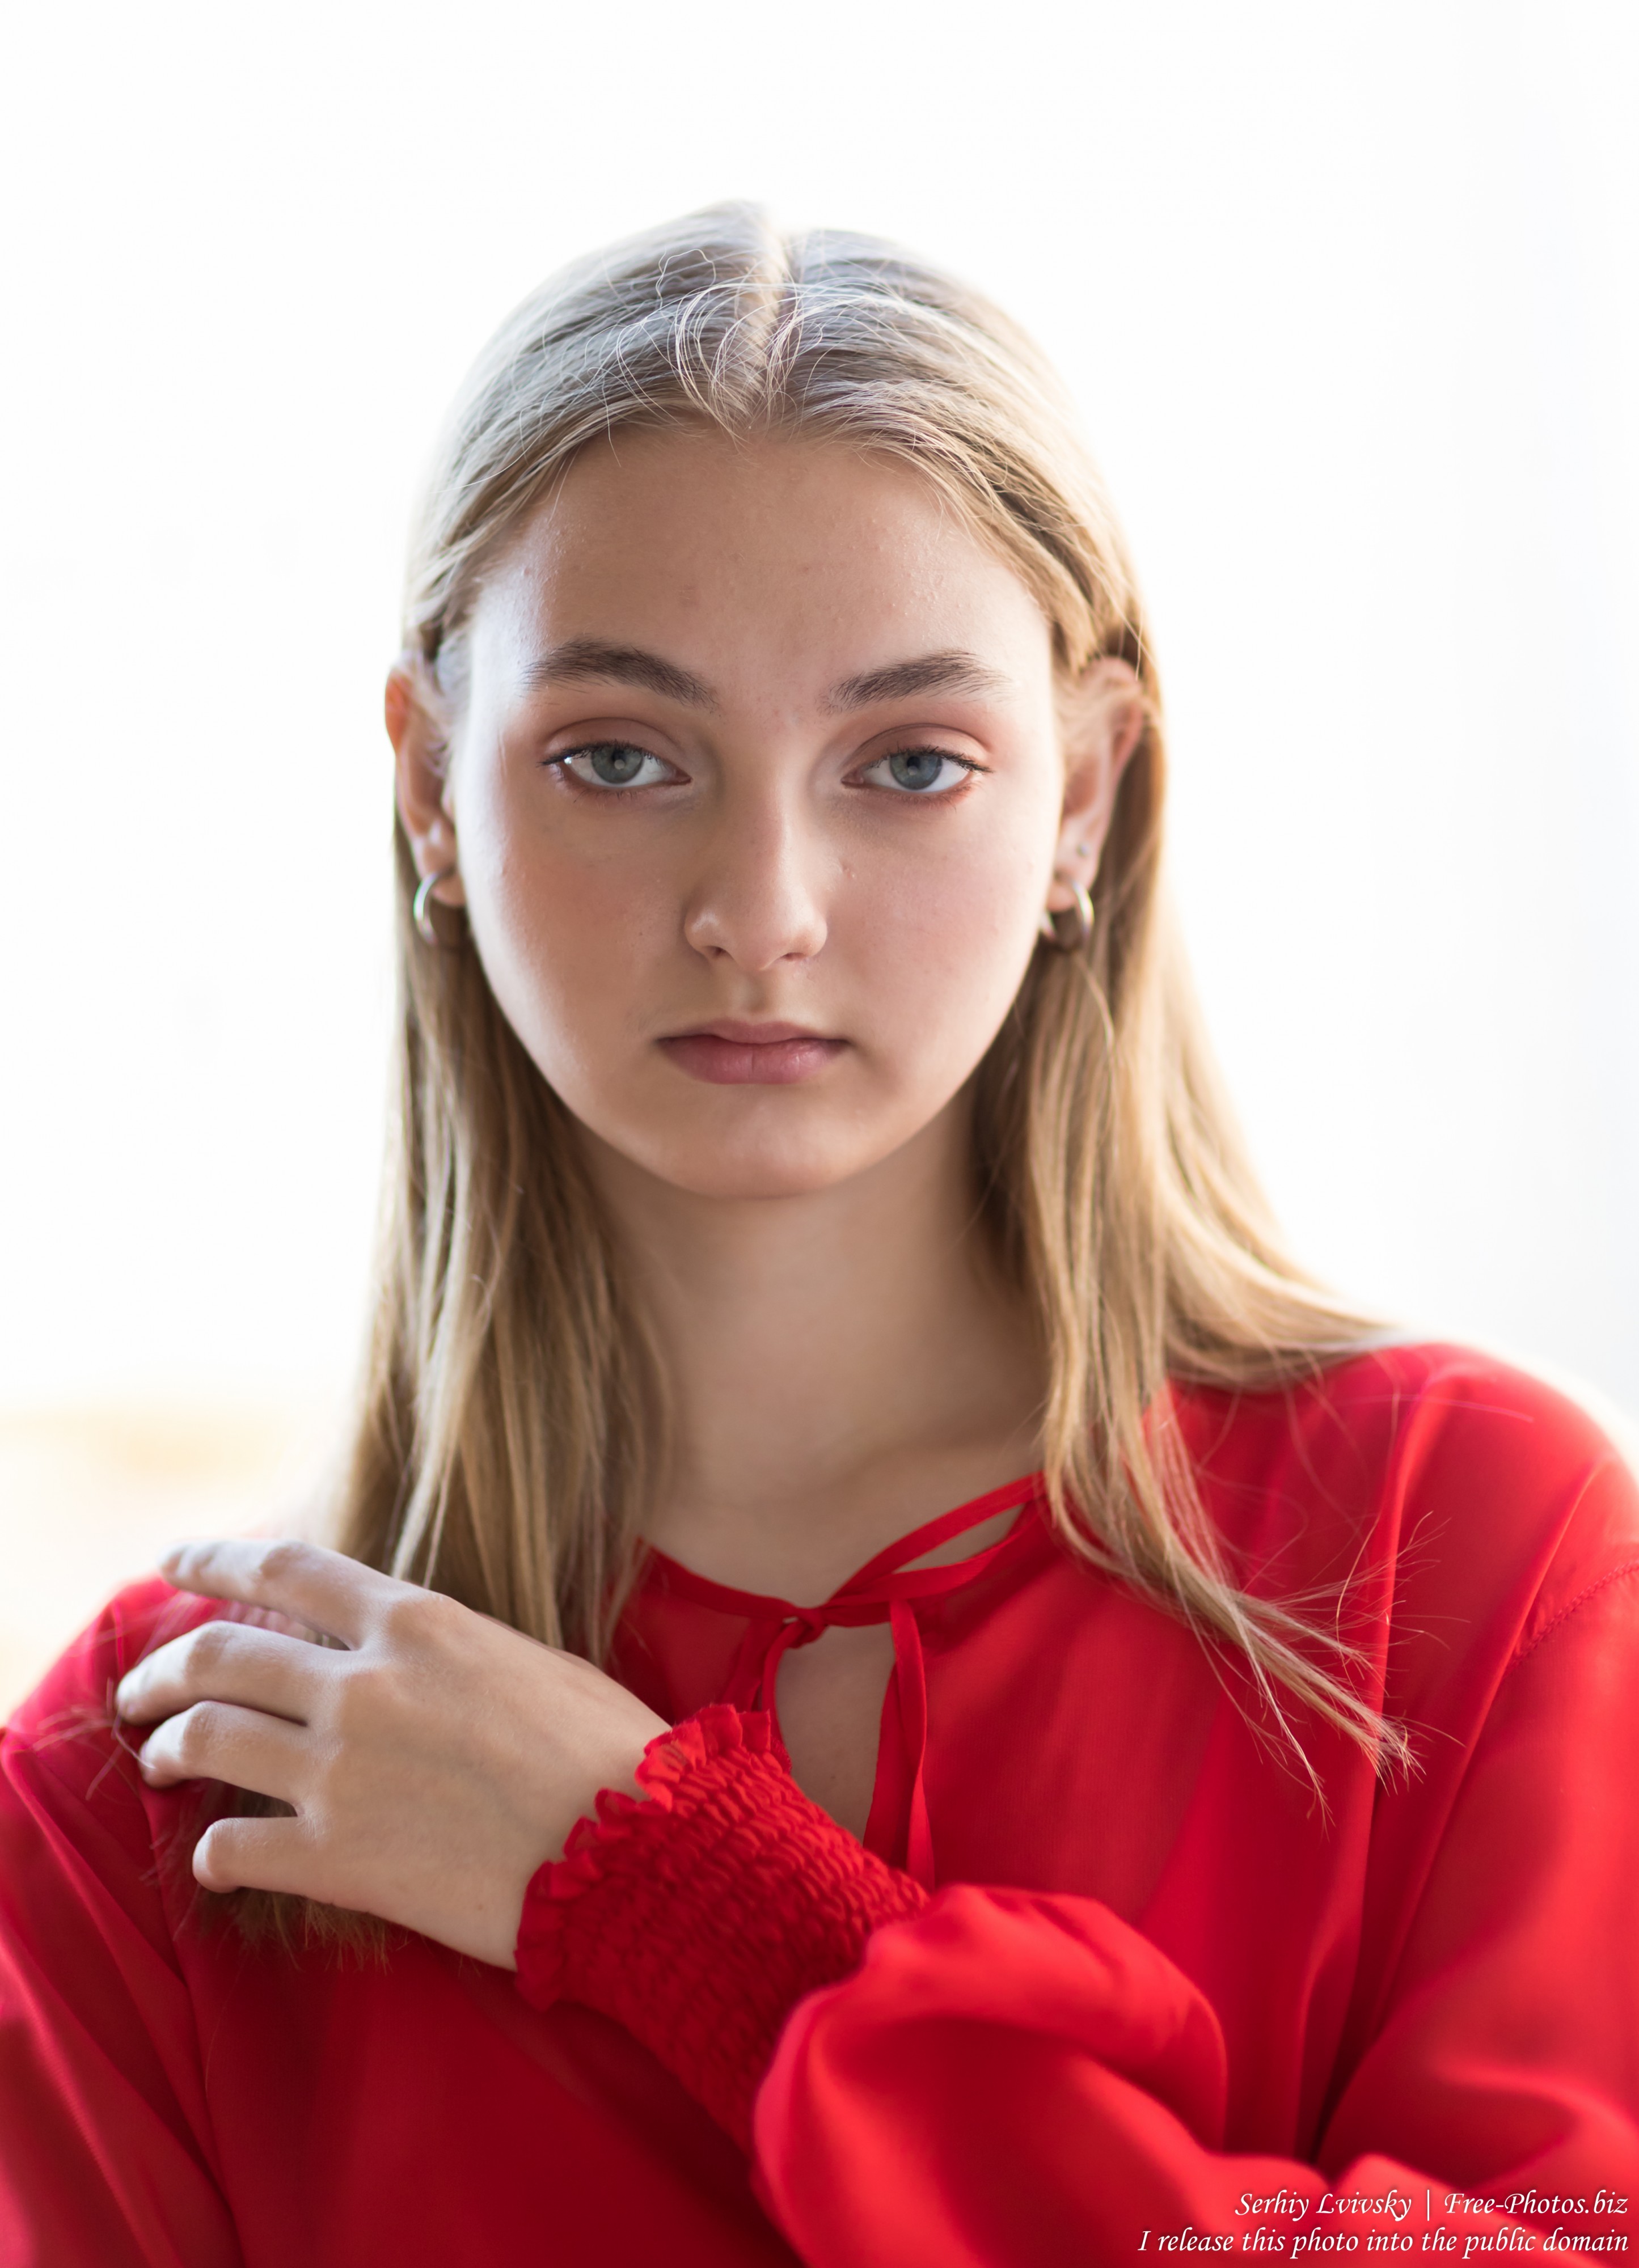 Nastia - a 16-year-old natural blonde girl photographed in September 2019 by Serhiy Lvivsky, picture 16